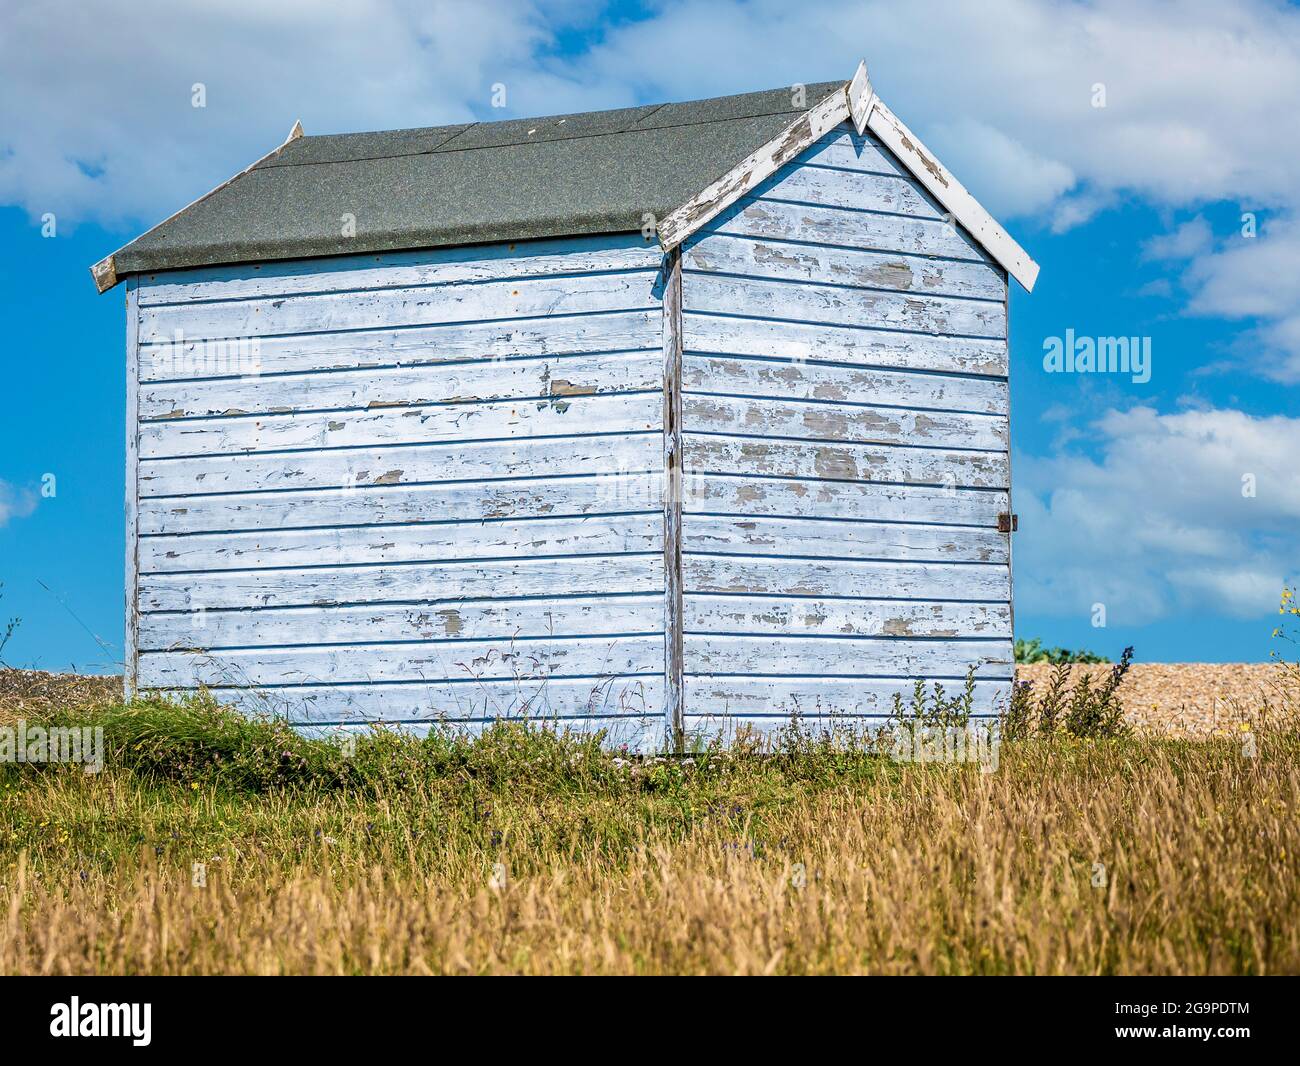 Landscape of a pale blue wooden weathered beach hut with flaking paint by the sea, taken in Greatstone New Romney Kent England on the 17th July 2021 Stock Photo